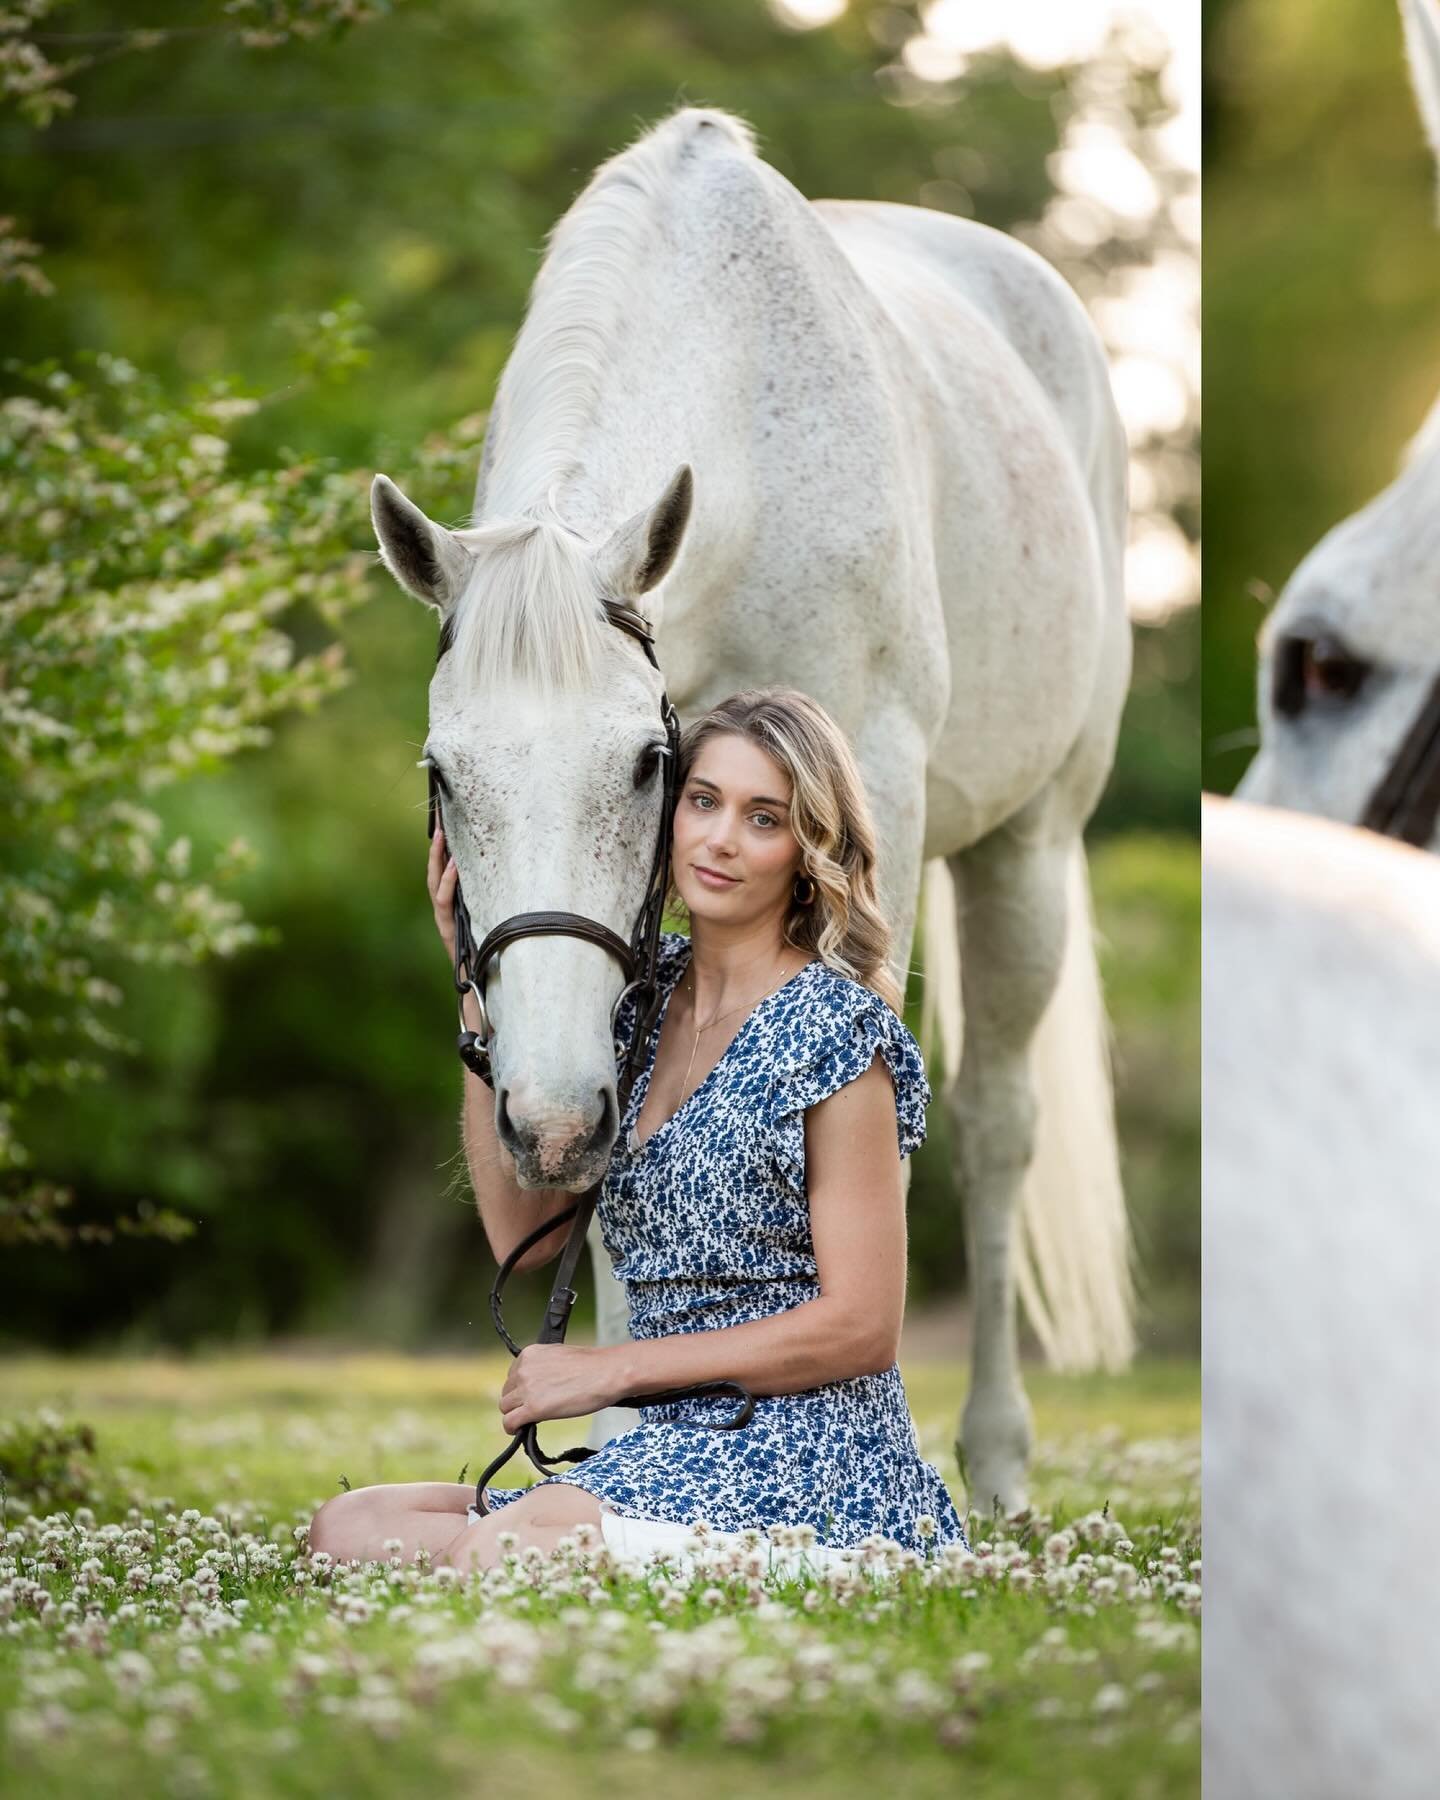 I had an absolute blast with stunning Lauren, her lease horse Snoopy, and her sweet teeny tiny pups. So many favorites from this session!

#horses #horsegirlenergy #equestrian #equine #equinephotography #equestrianlife #equestrianstyle #horsephotogra